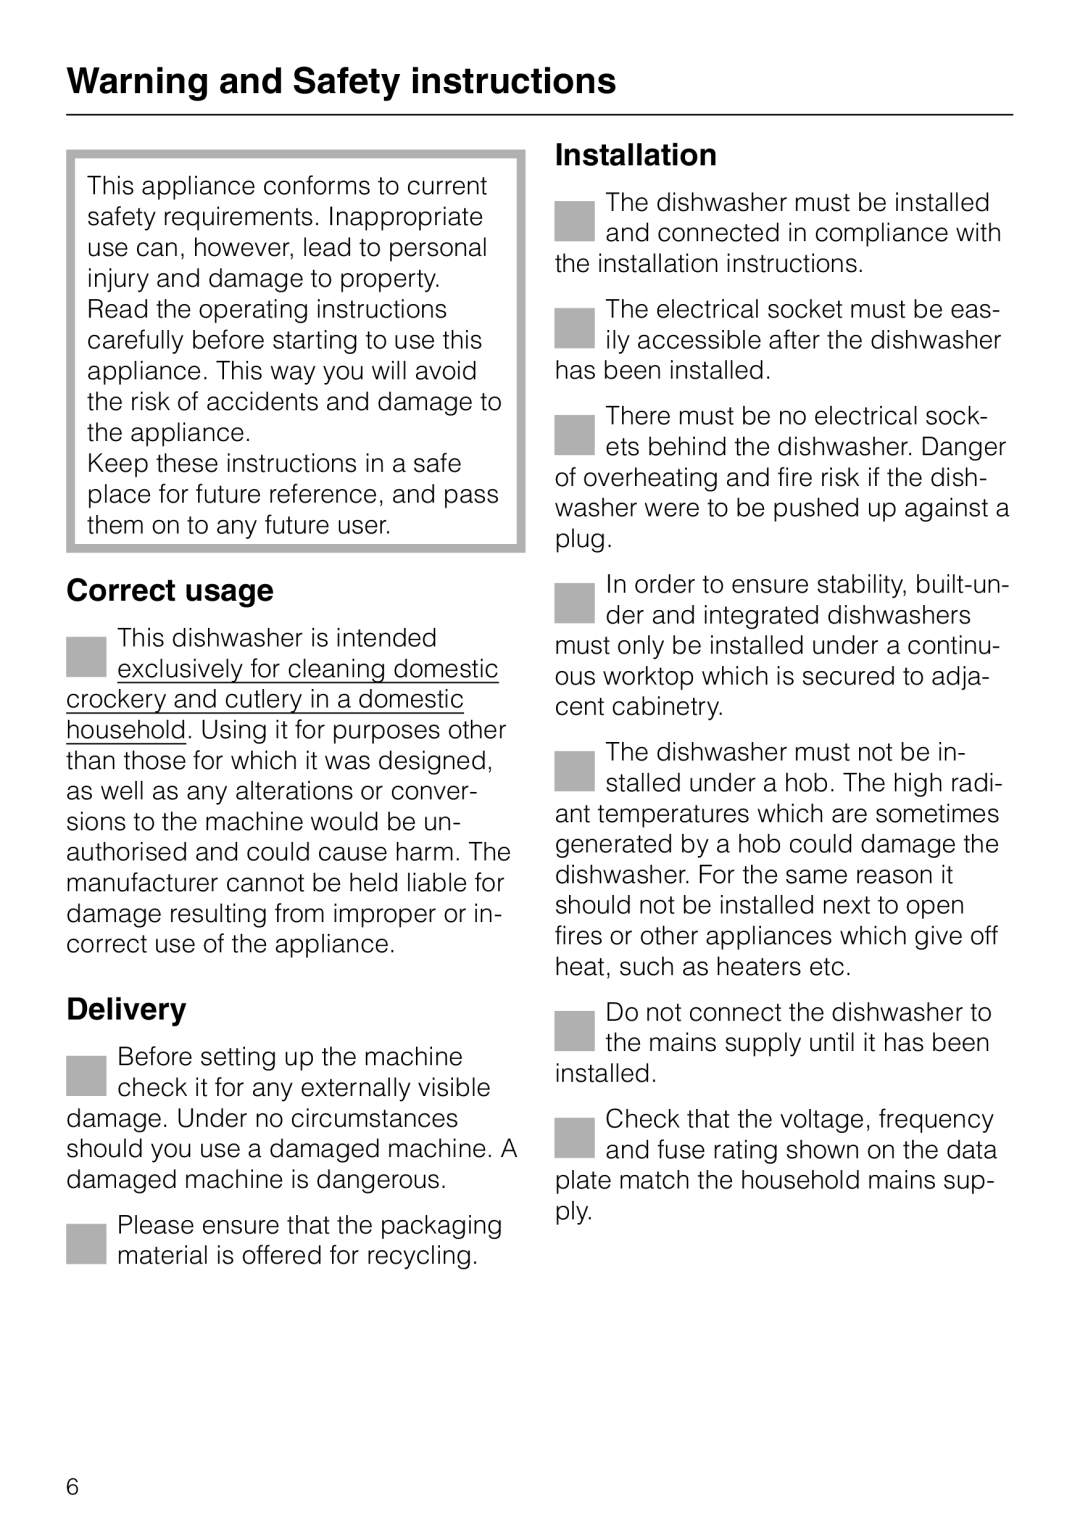 Miele dishwashers installation instructions Warning and Safety instructions, Correct usage, Delivery, Installation 